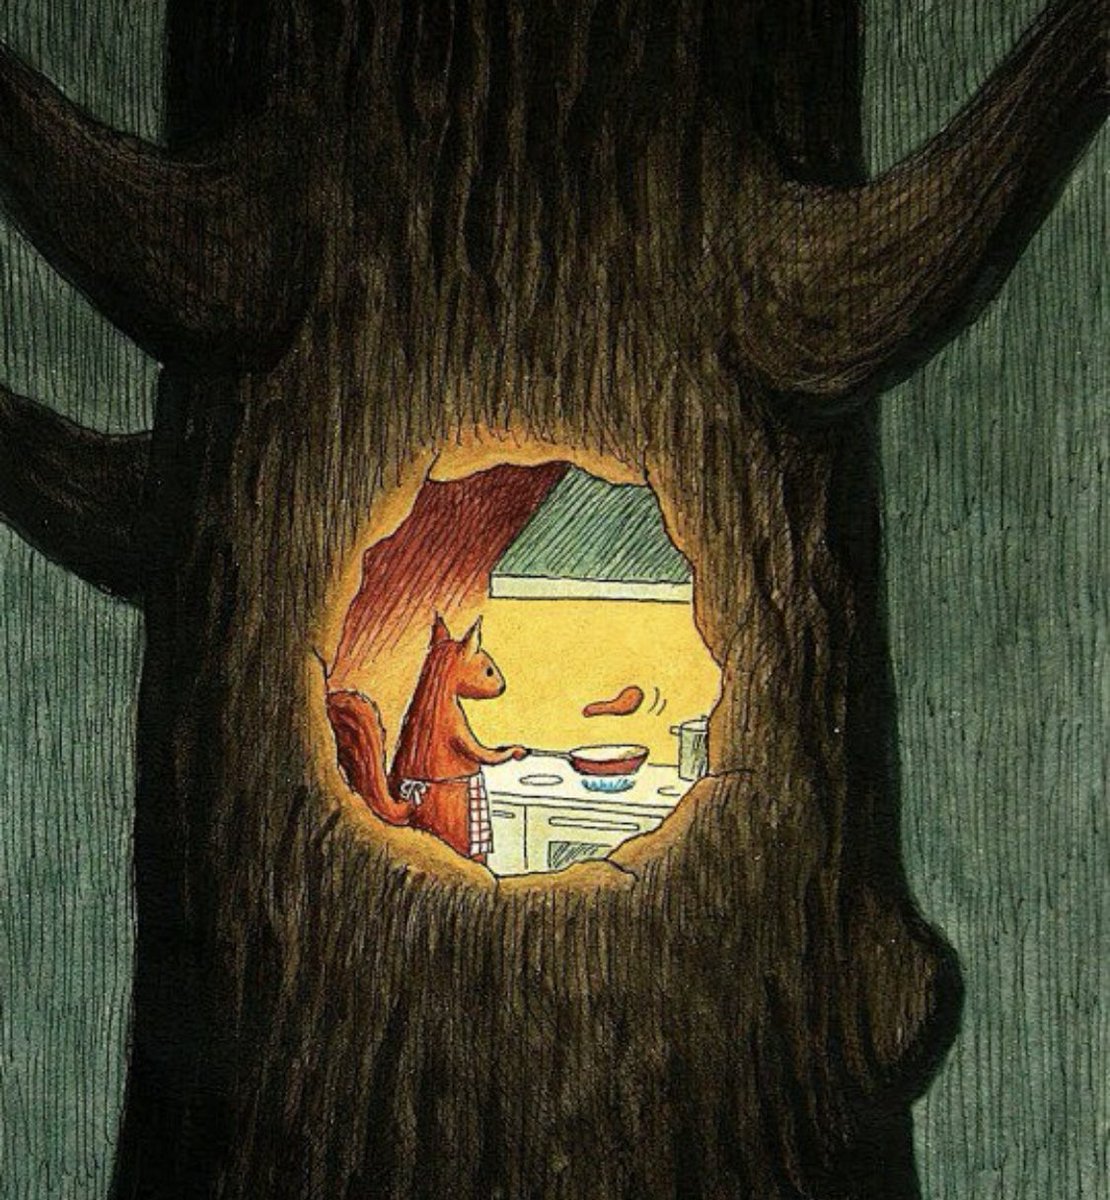 You are all invited for pancakes in my tree hollow Art by Franco Matticchio